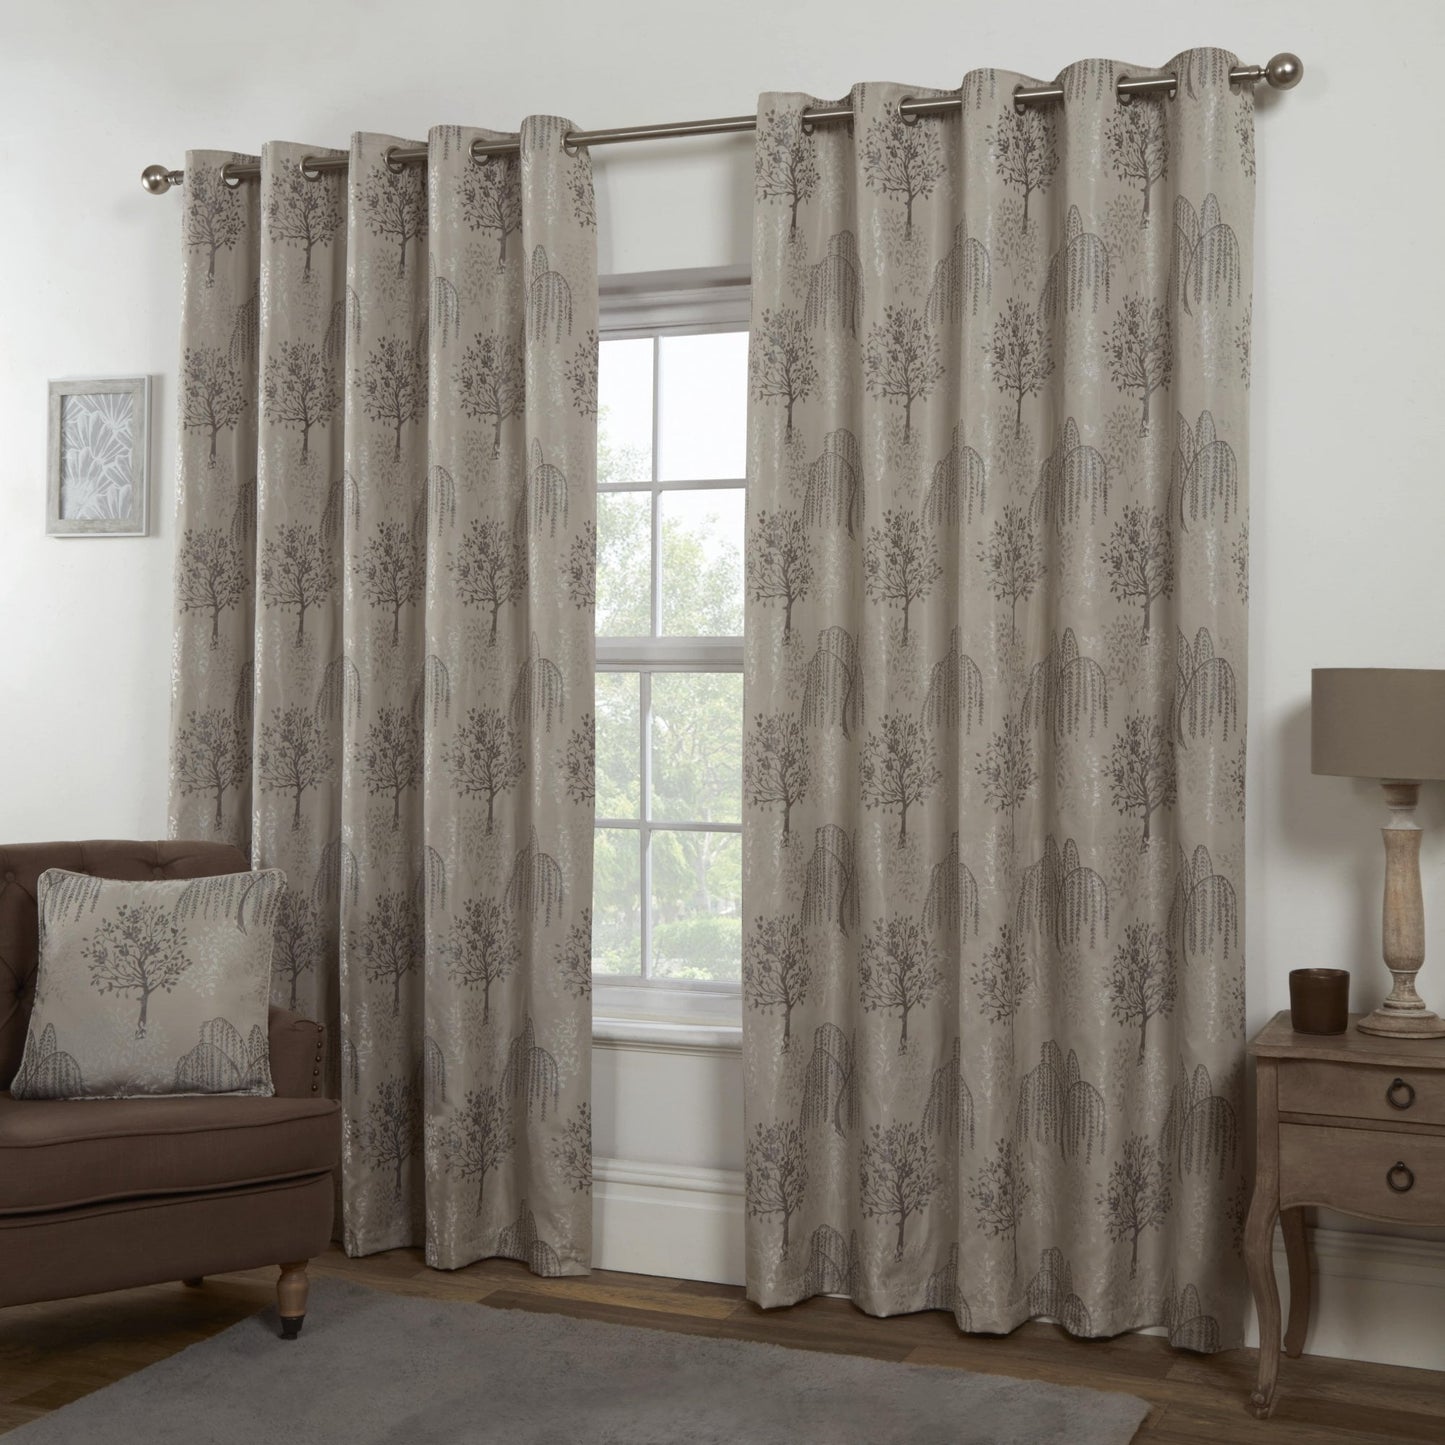 Orchard Patterned Eyelet Curtains - Silver